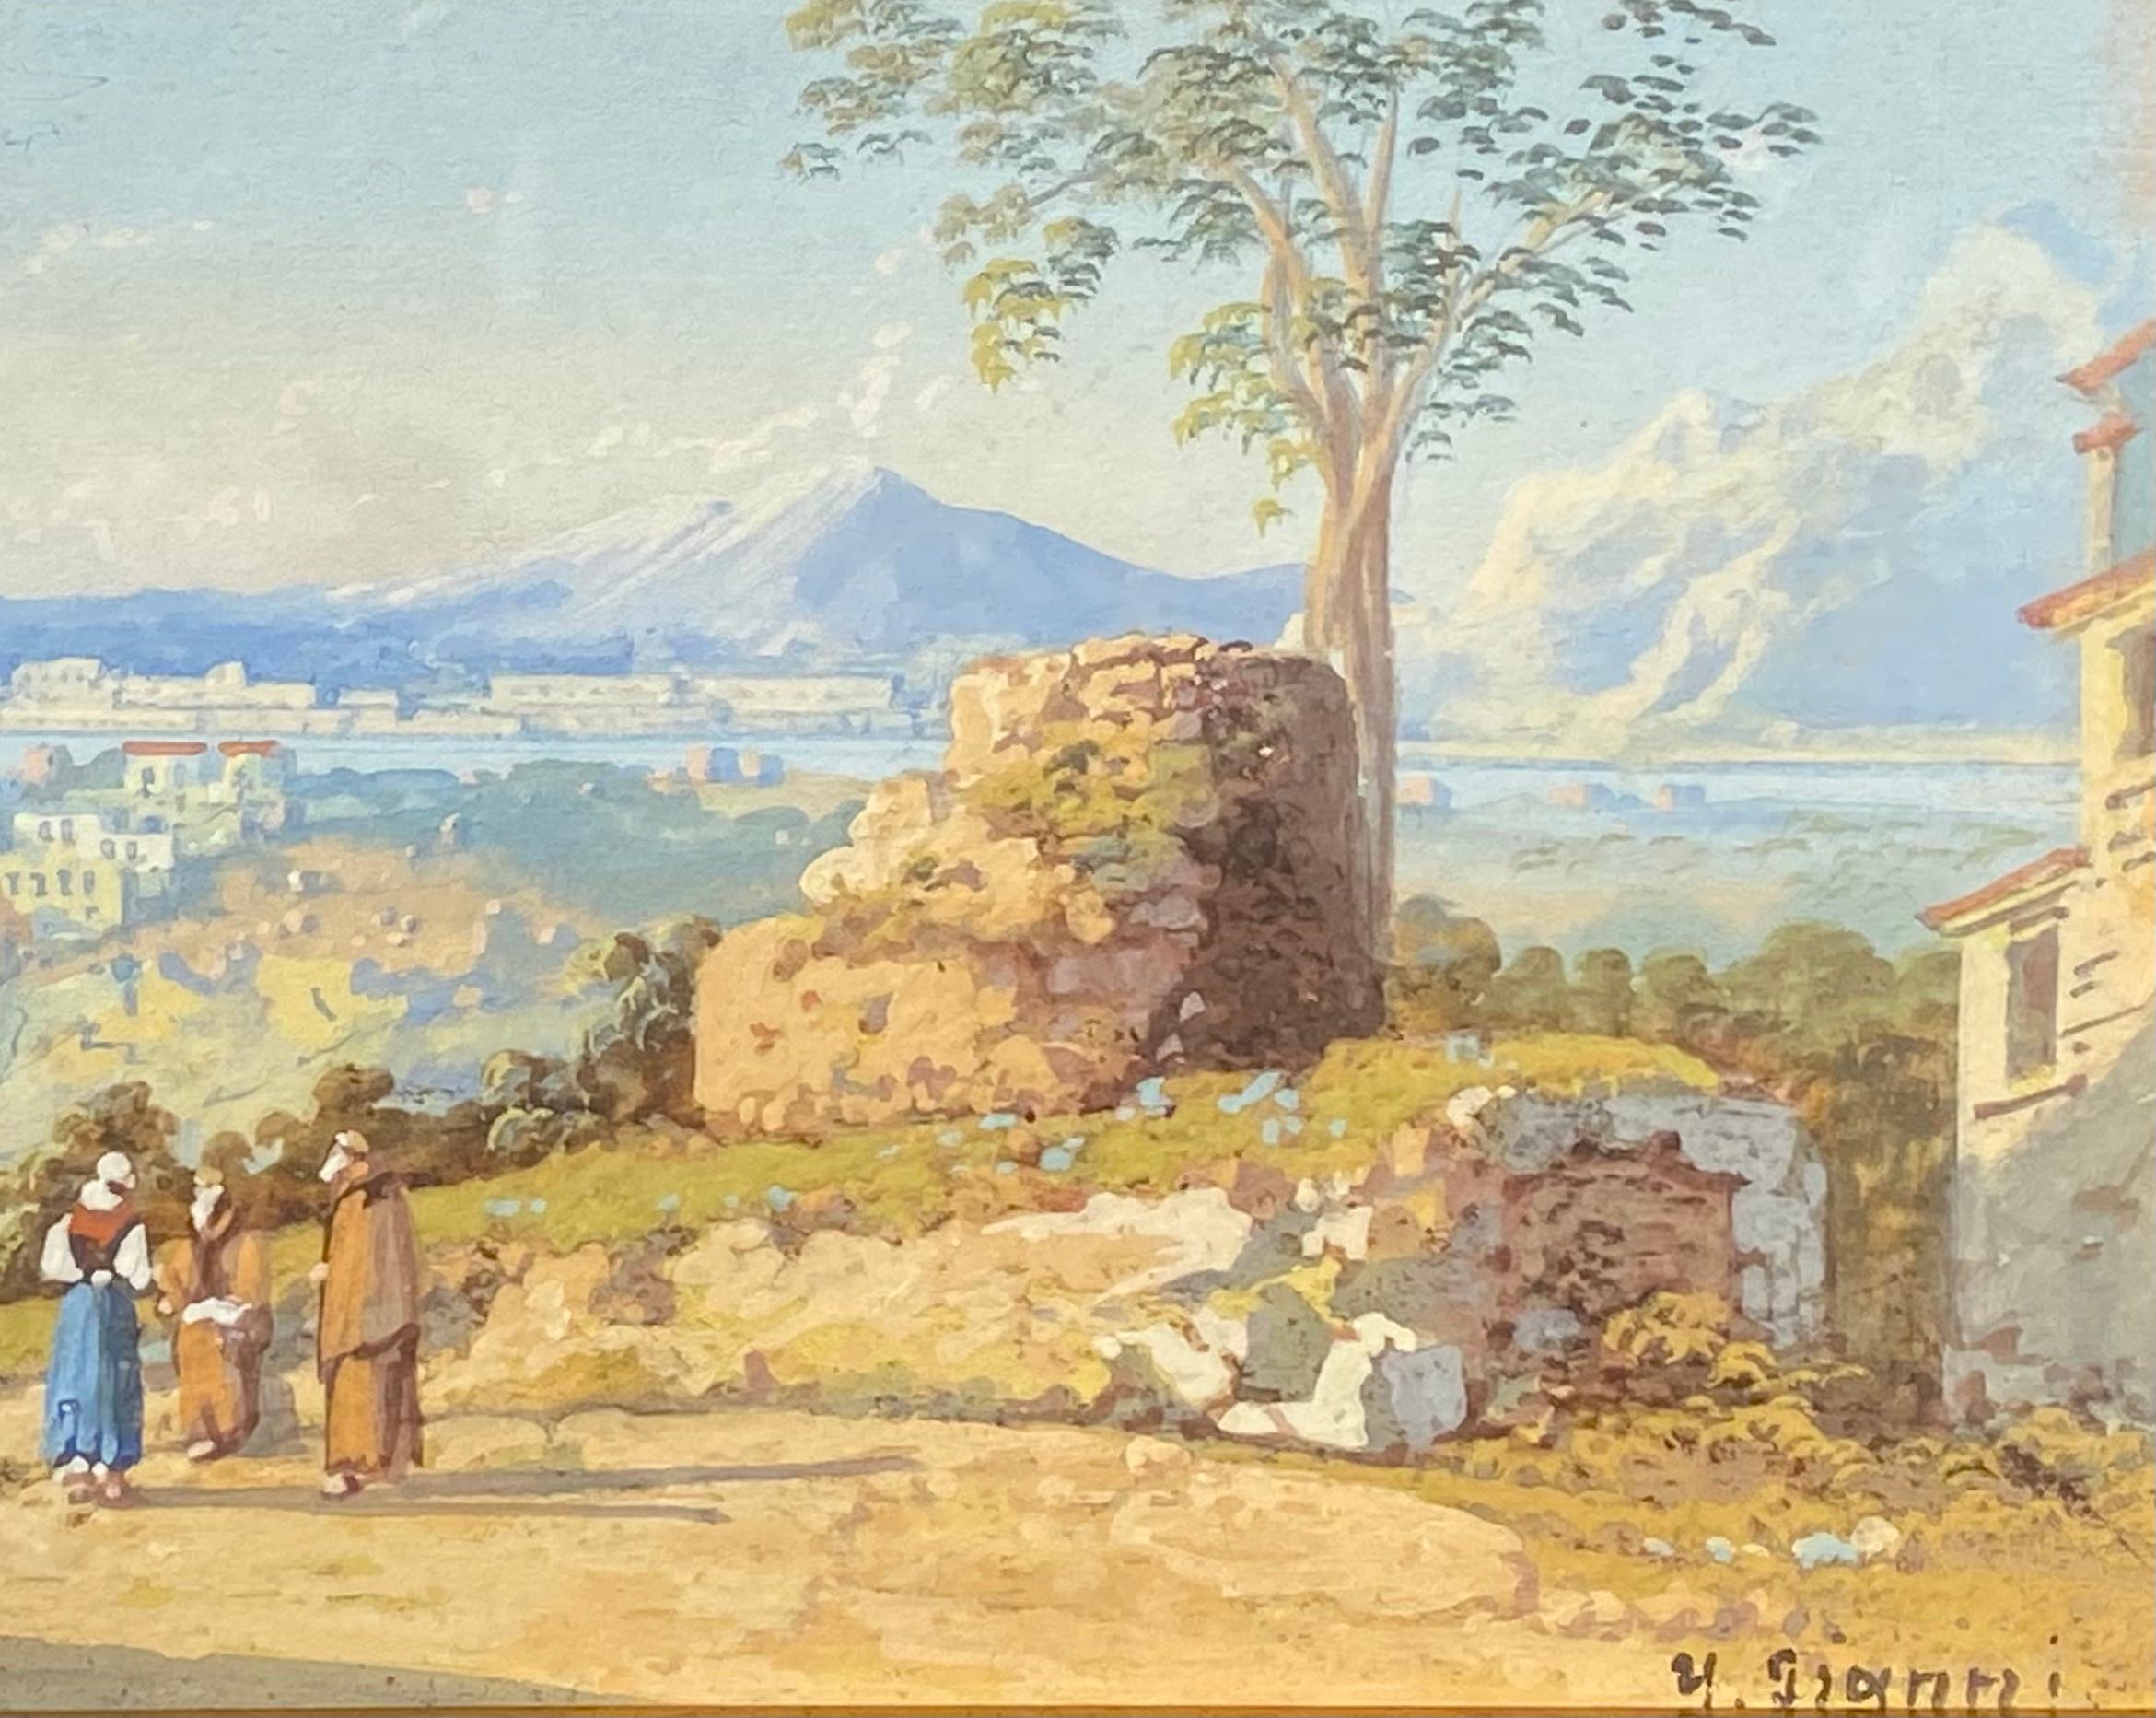 Very well executed original gouache on archival paper by the Italian artist, Maria Ada Gianni.  Signed lower left.  Condition is excellent.  Circa 1920. The paintings consists of figures on a hilltop veranda with the Bay of Naples in the background.